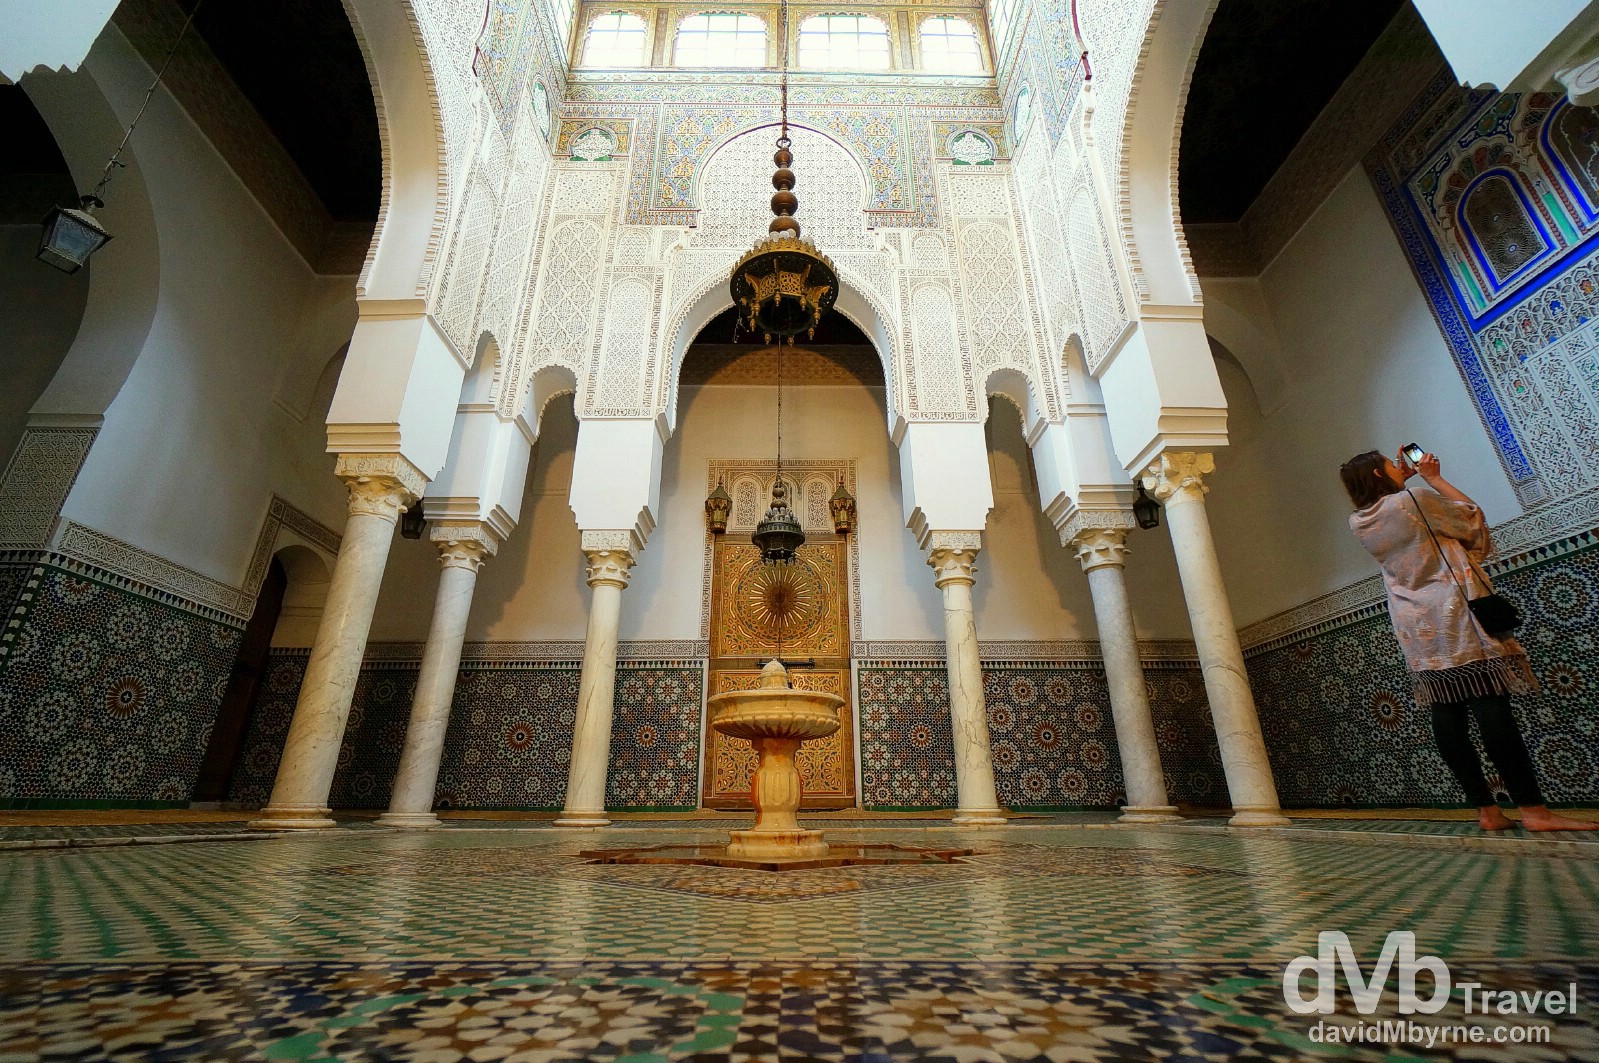 A section of the stunning tomb hall of the Moulay Ismail Mausoleum showcasing the best of Moroccan craftsmanship. Meknes, Morocco. May 24th, 2014.